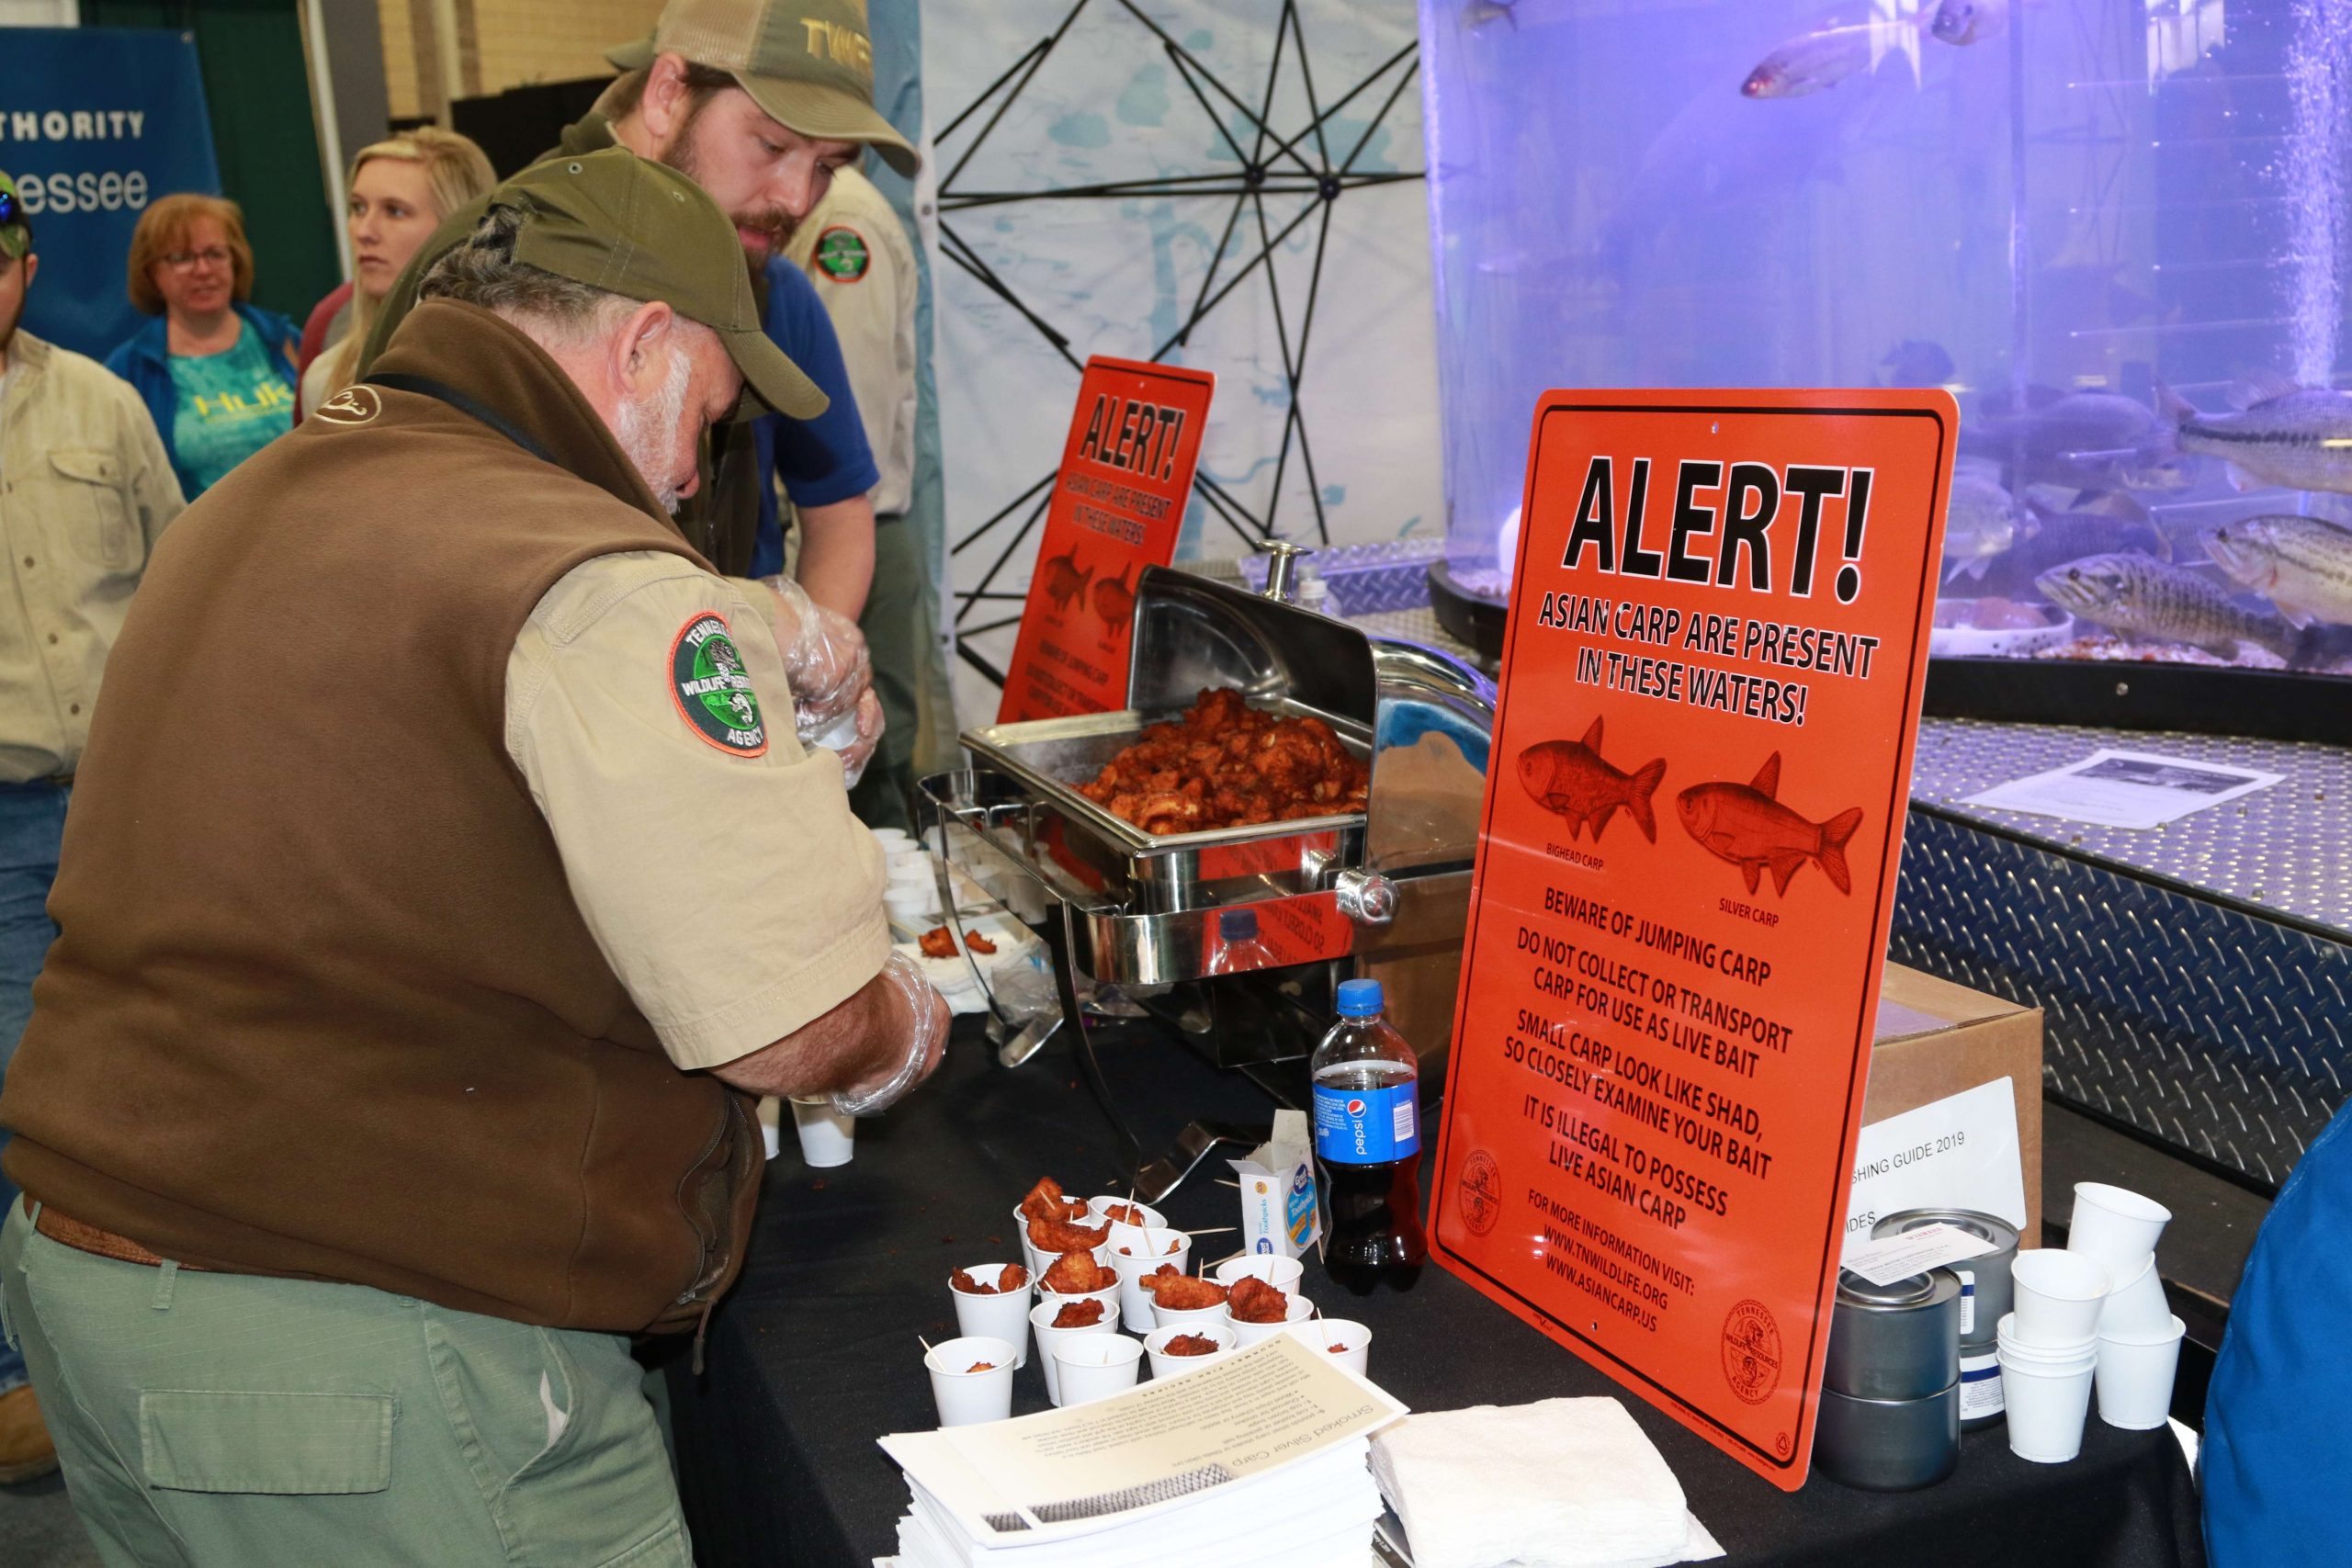 The Tennessee Valley Authority offered samples of fried Asian carp. General consensus: Very tasty!